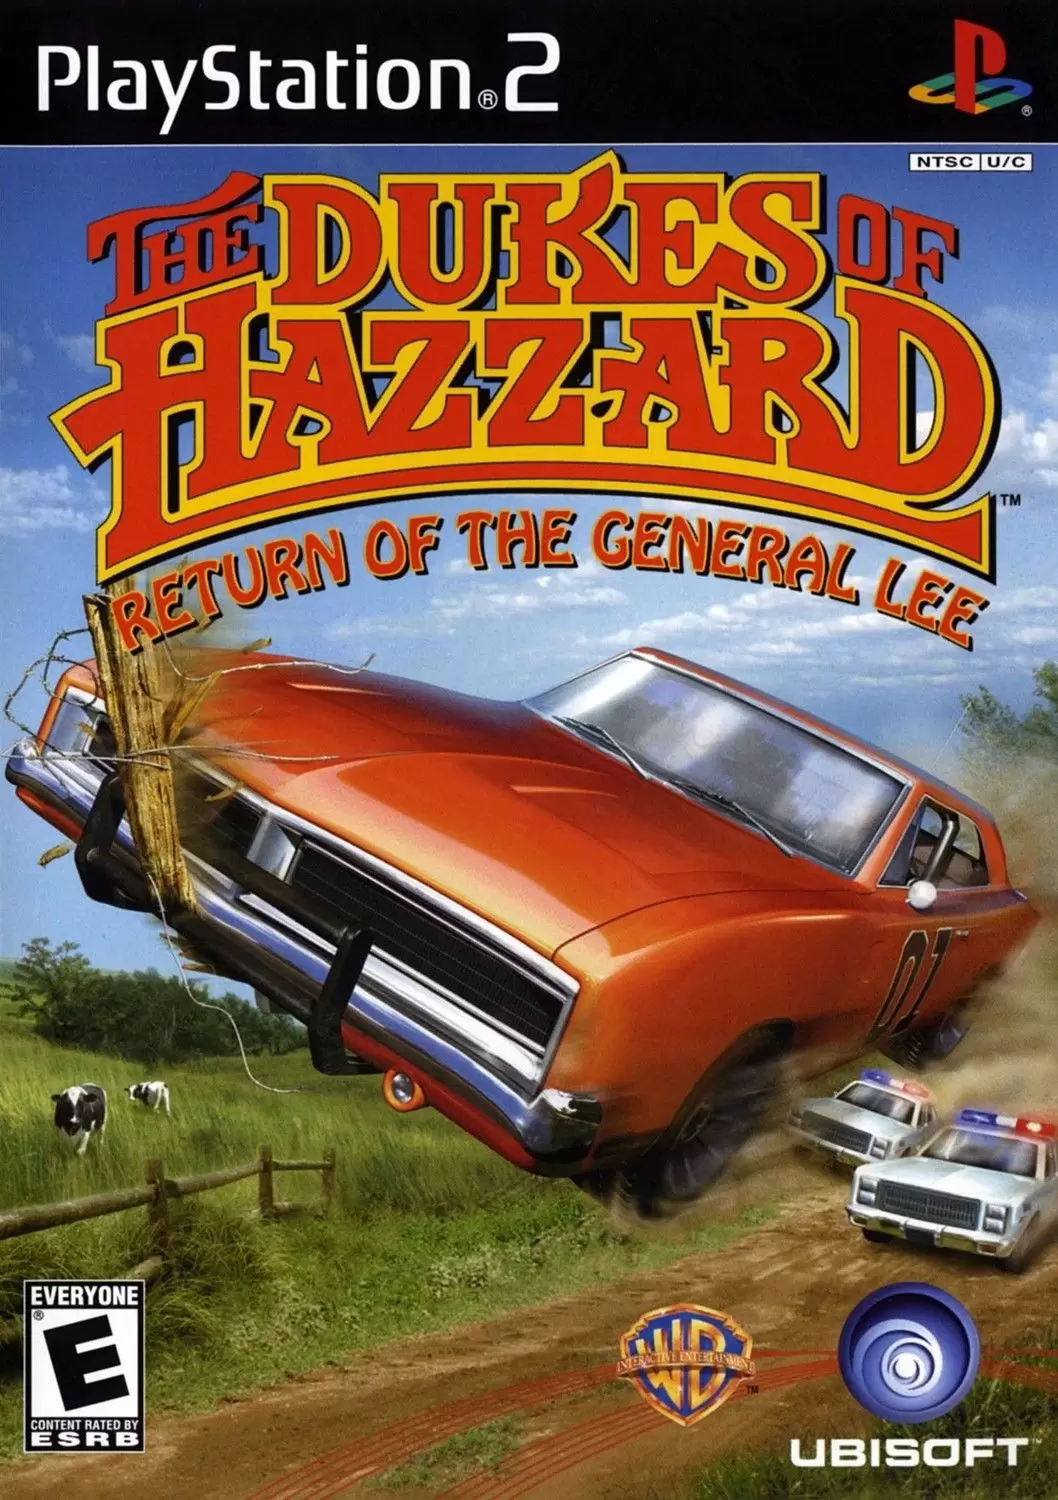 PS2 Games - The Dukes of Hazzard: Return of the General Lee